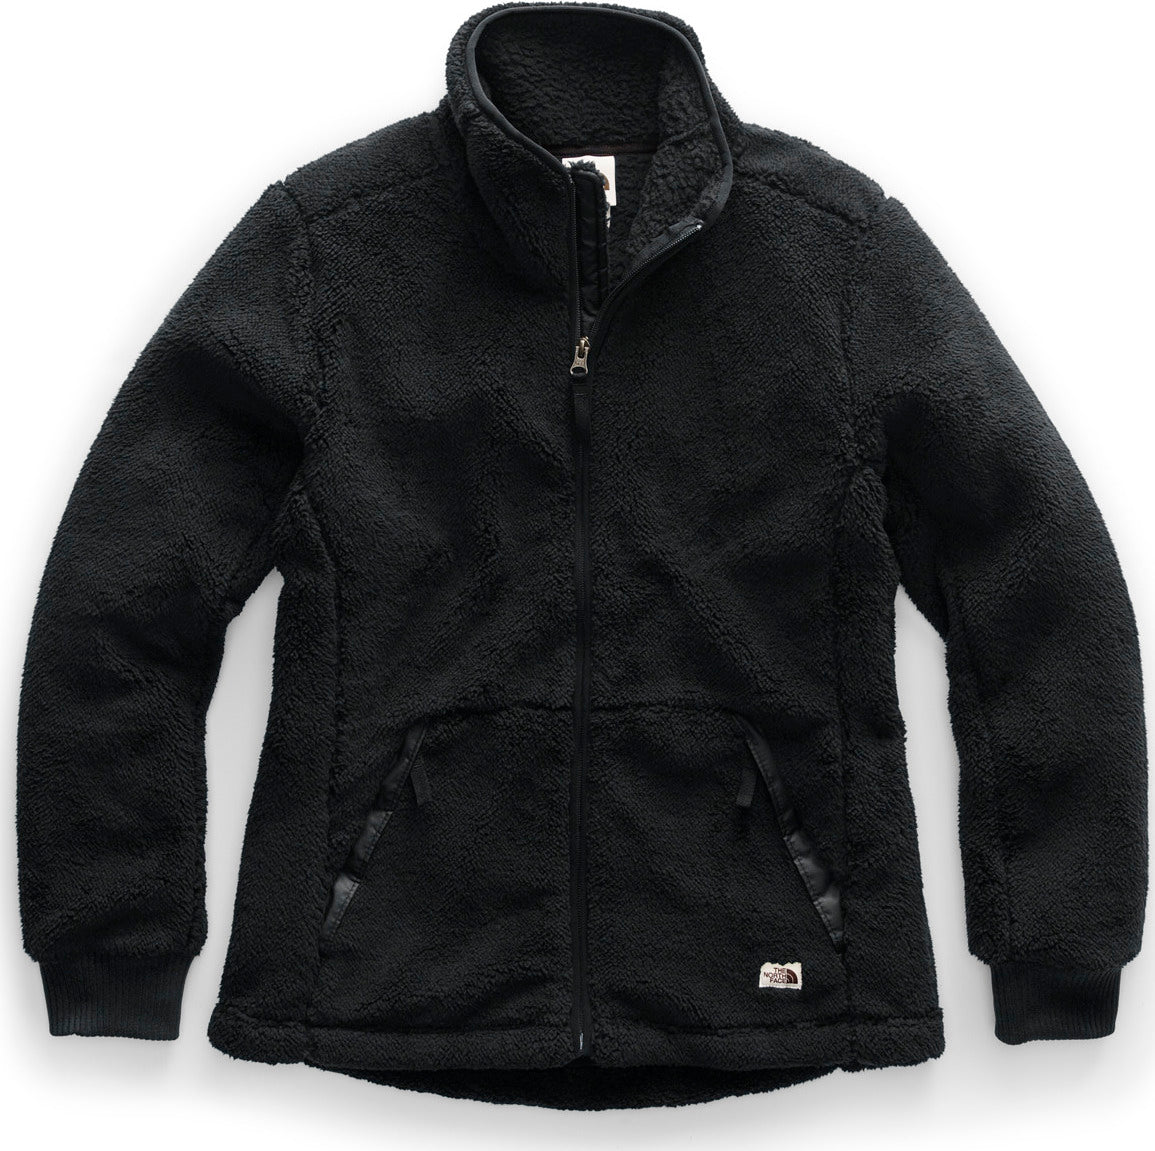 Download The North Face Campshire Full-Zip Jacket - Women's ...